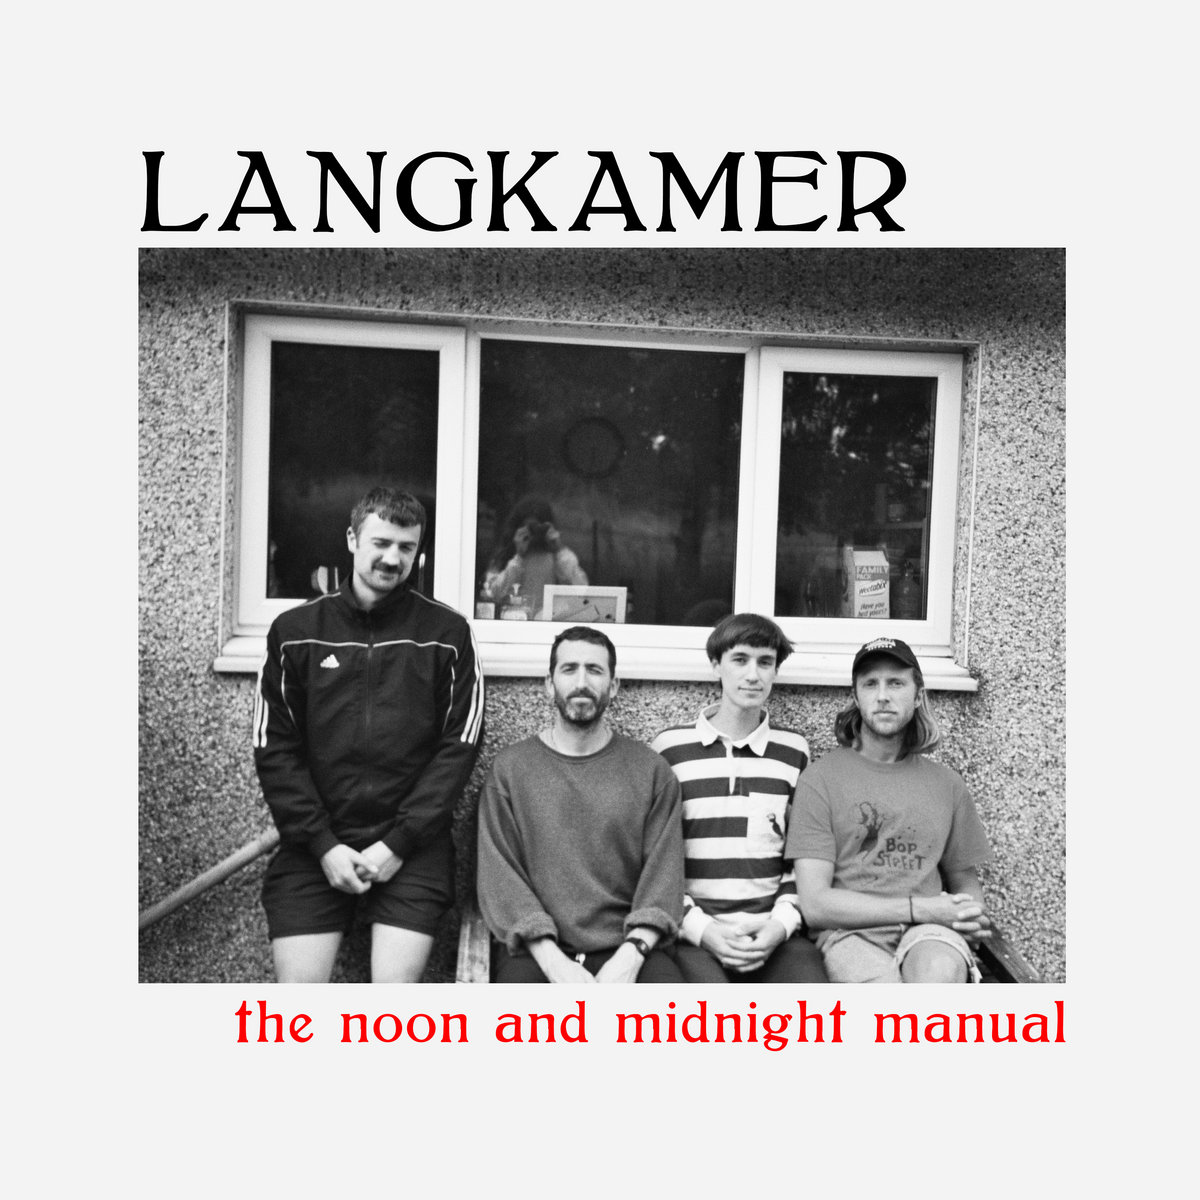 langkamer the noon and midnight manual album cover - black and white photo of four young men outside a house